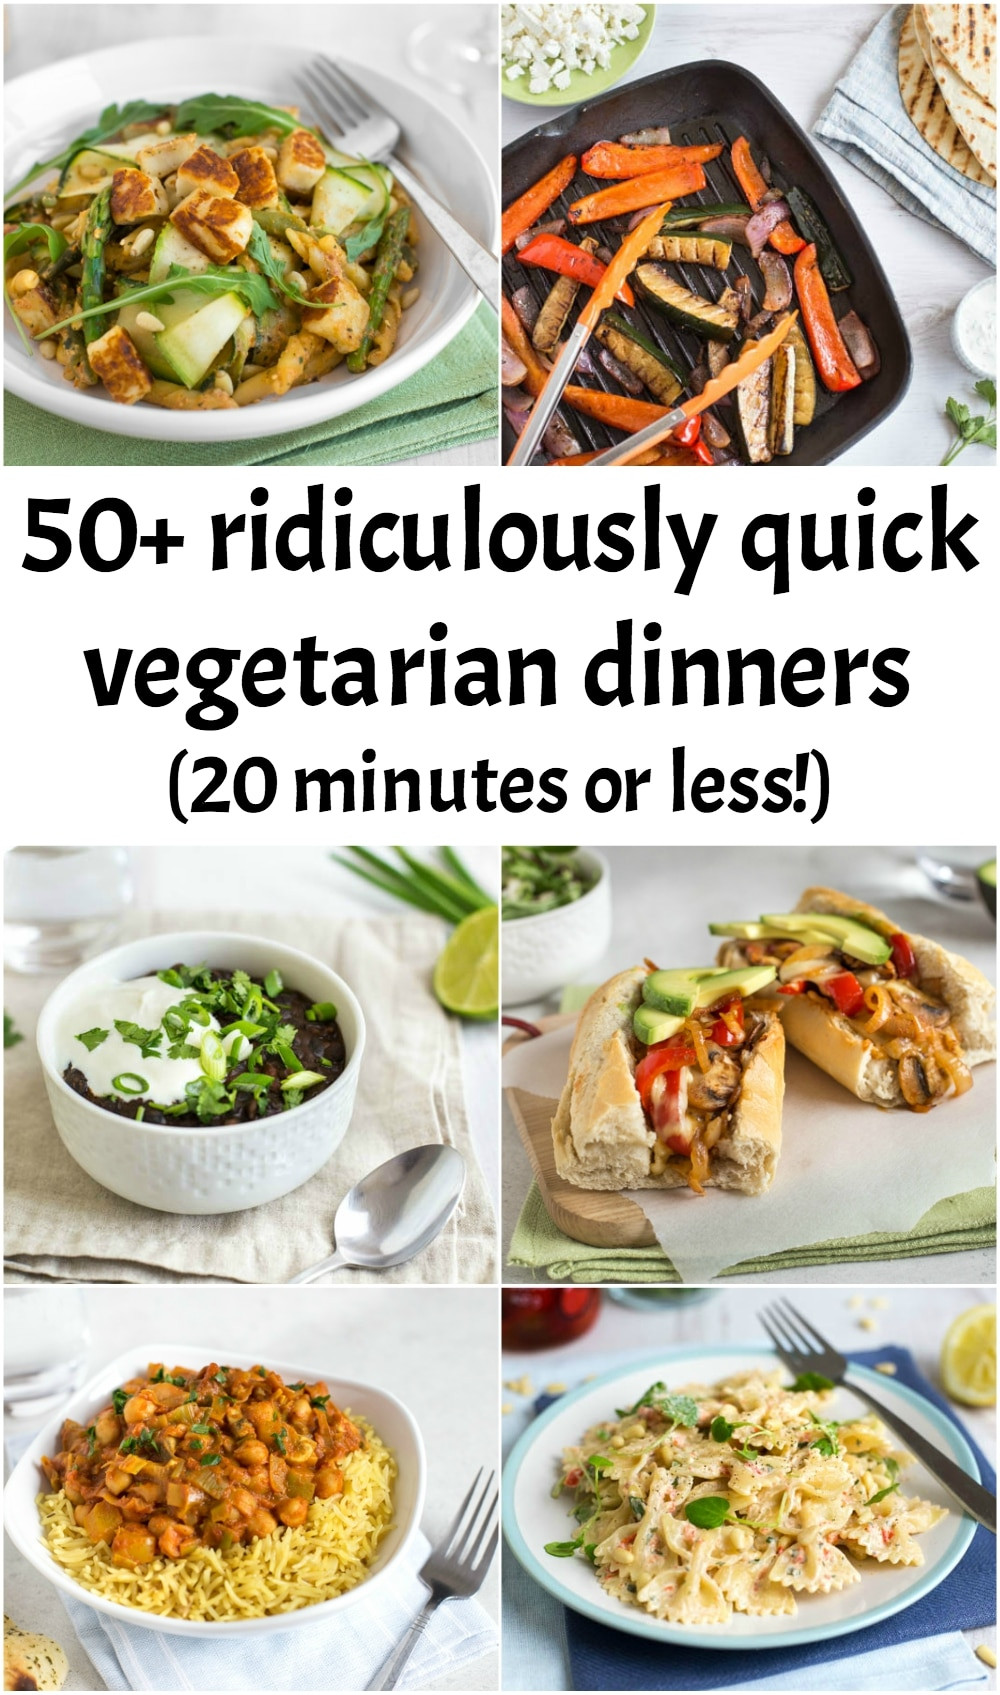 Vegetarian Recipes For Dinner
 50 ridiculously quick ve arian dinners 20 minutes or